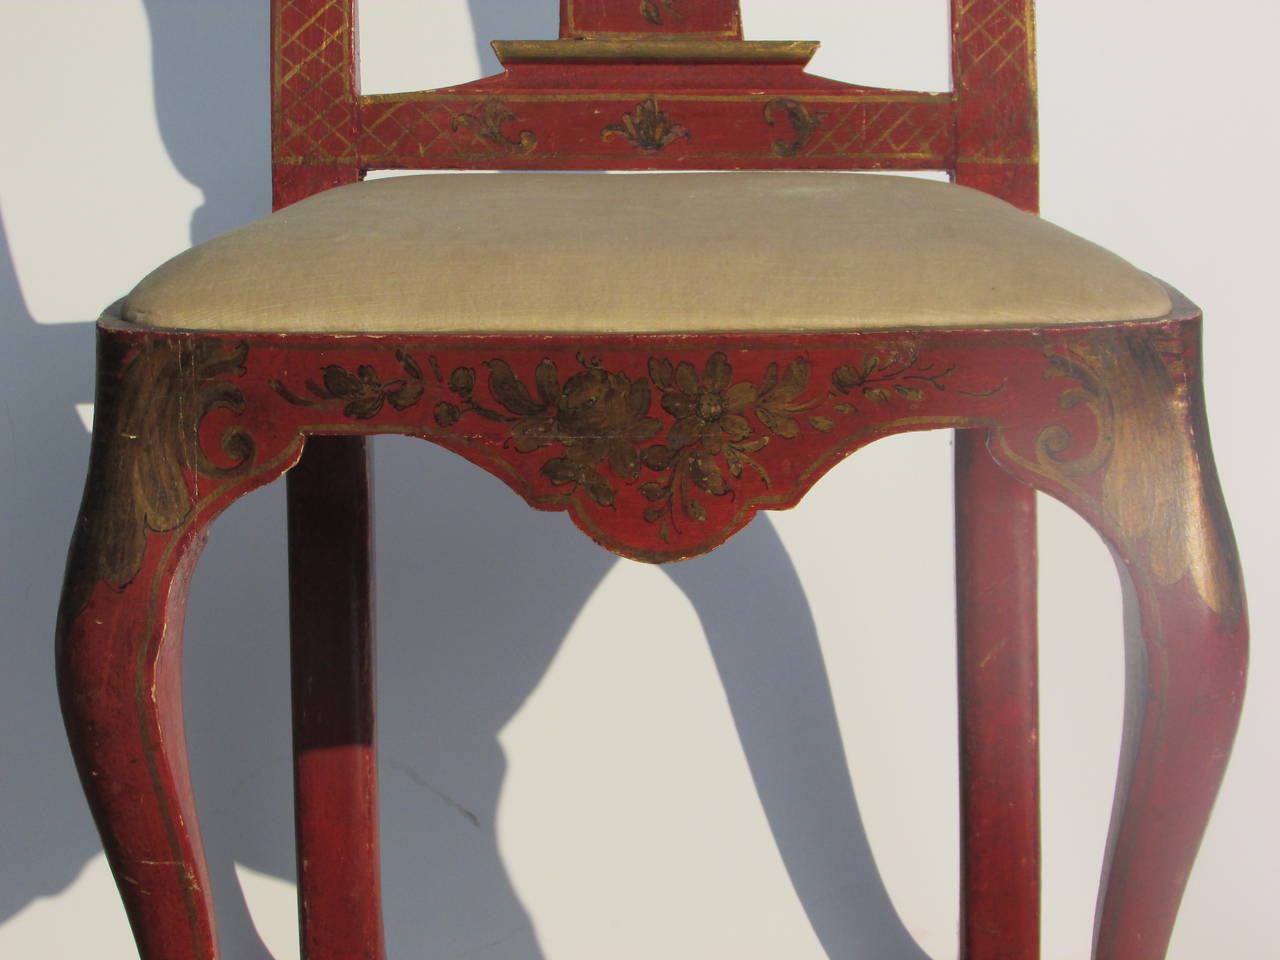 18th century chairs styles